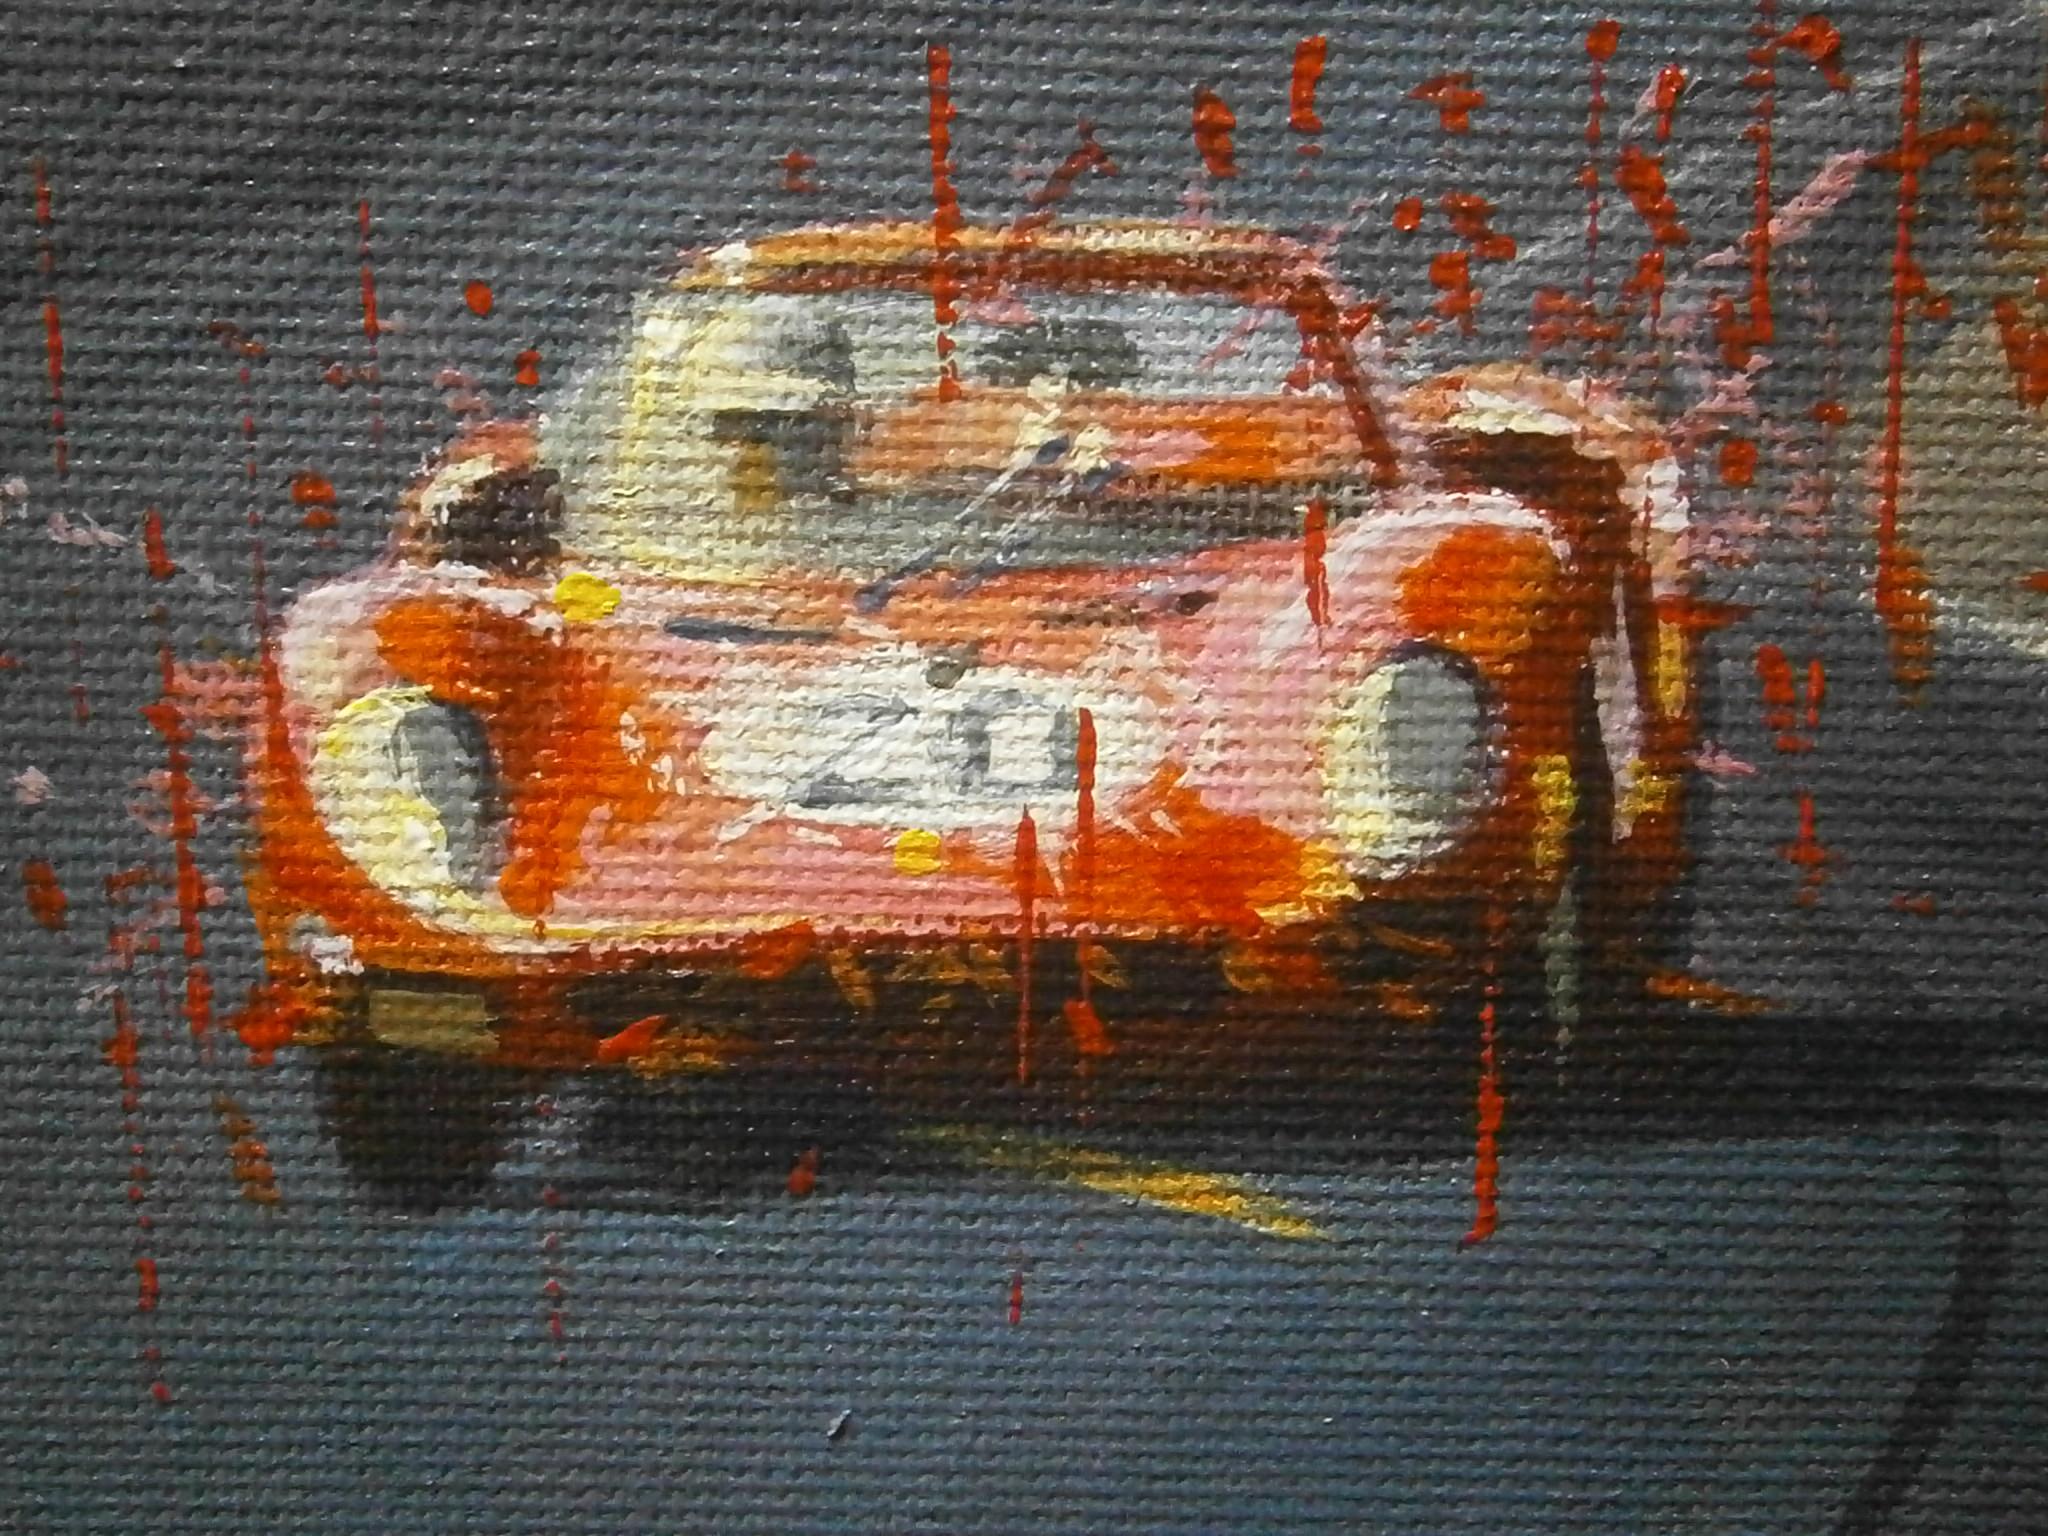 Alex Balaguer
BALAGUER , Alex ( Barcelona 1968 )
During early childhood, Àlex Balaguer began to sketch motorcars symbolic of Maranello’s trademark vehicle.
Self-taught in the art world, Balaguer decided to unite his big love of motoring and